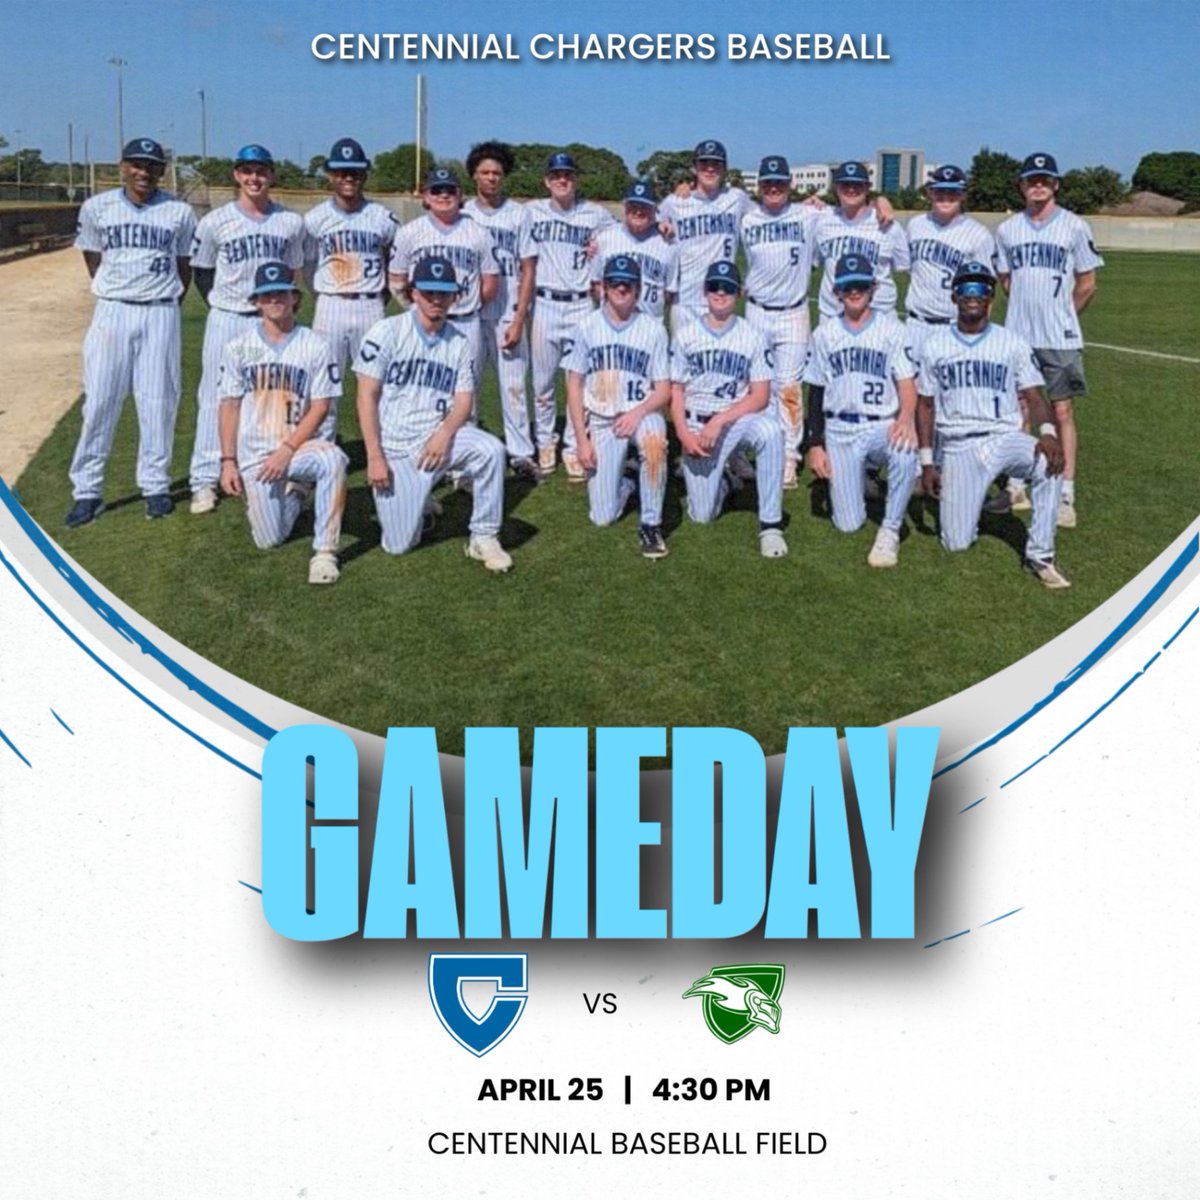 Let's play two!   The Chargers Baseball team is set to host a doubleheader today with the Peoria Richwoods Knights.  First pitch at 4:30 PM.  #IfItAintBlueItAintTrue #FullyCharged